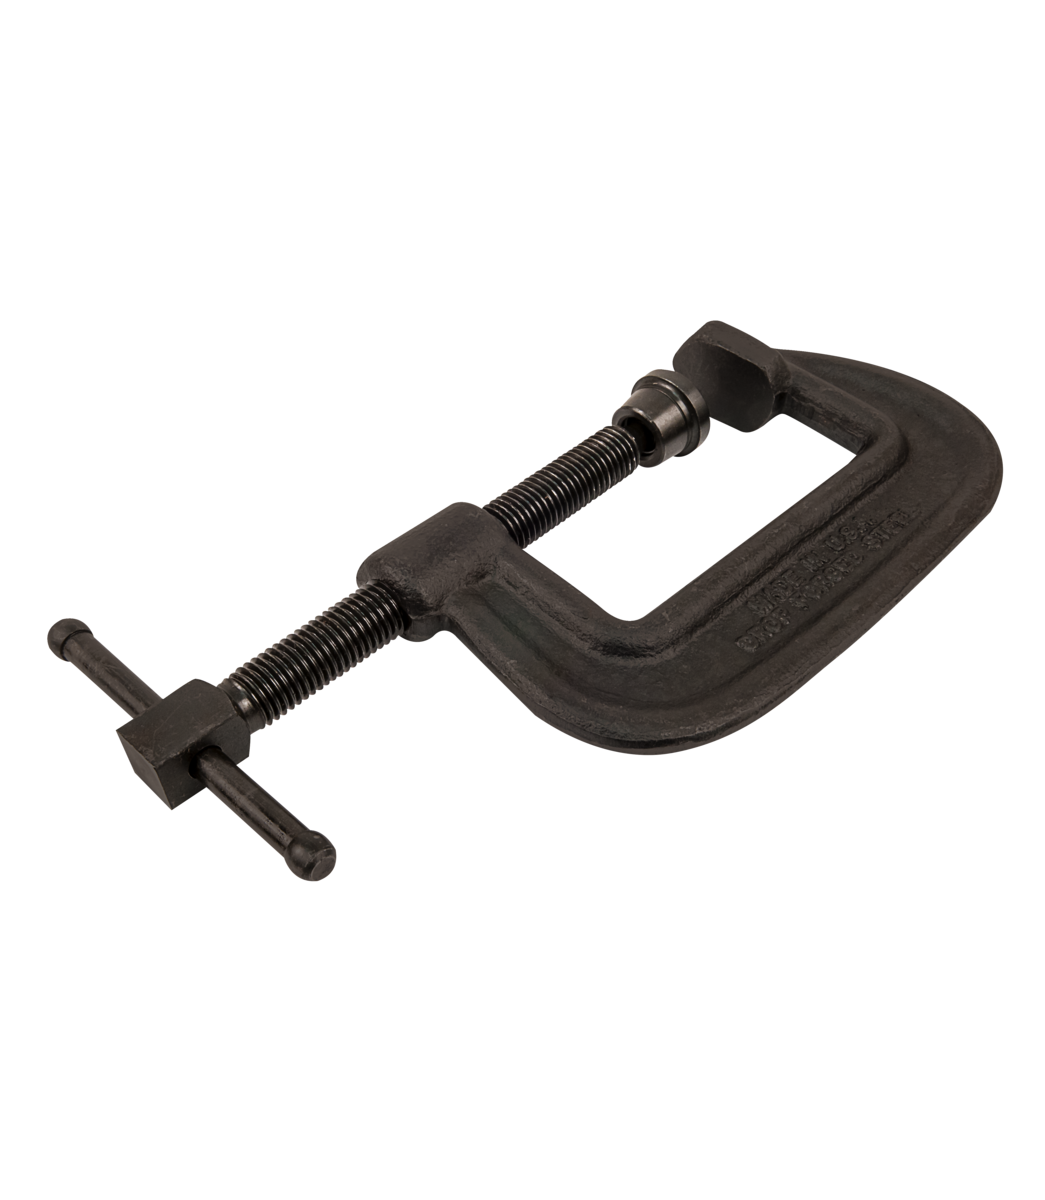 110, 100 Series Forged C-Clamp - Heavy-Duty 6 - 10” Opening Capacity